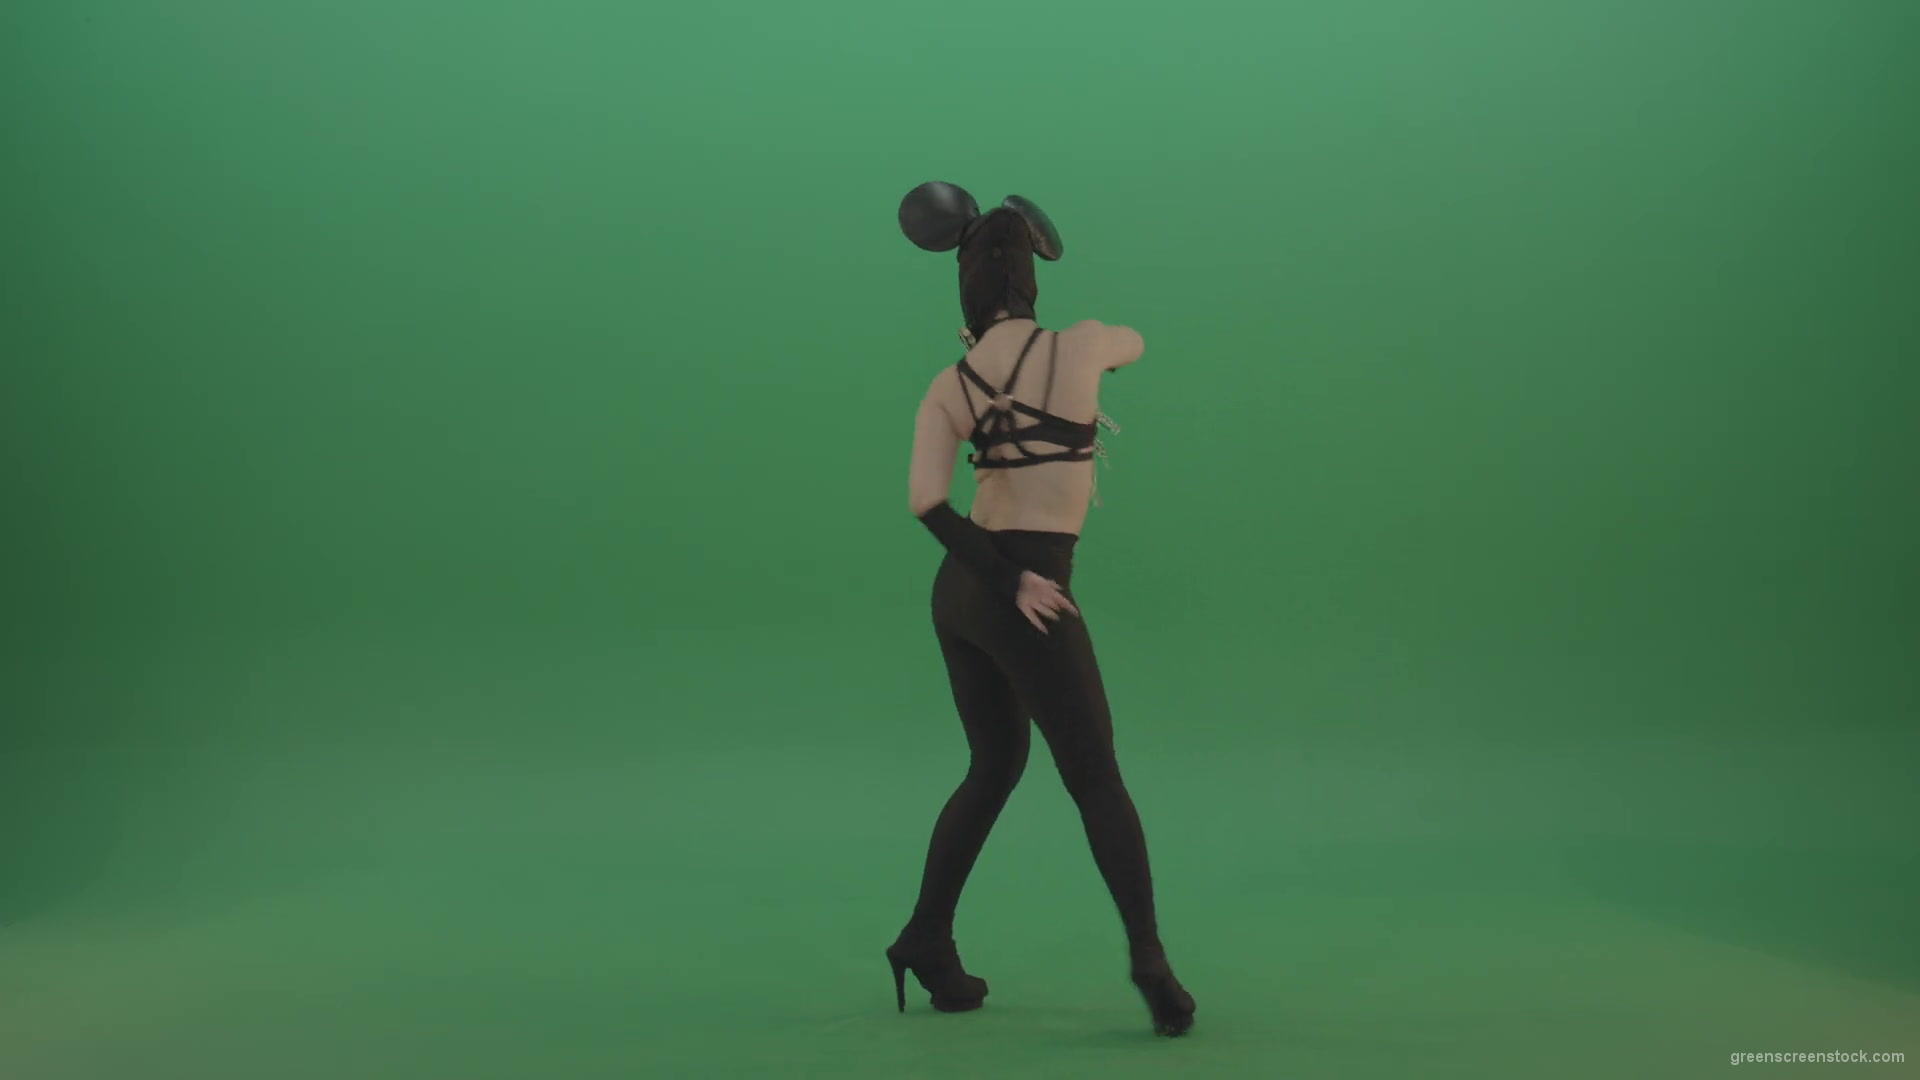 Girl-quickly-dances-in-the-style-of-Mickey-Mouse-on-the-sides-of-a-sexy-costume-on-green-screen-1920_009 Green Screen Stock